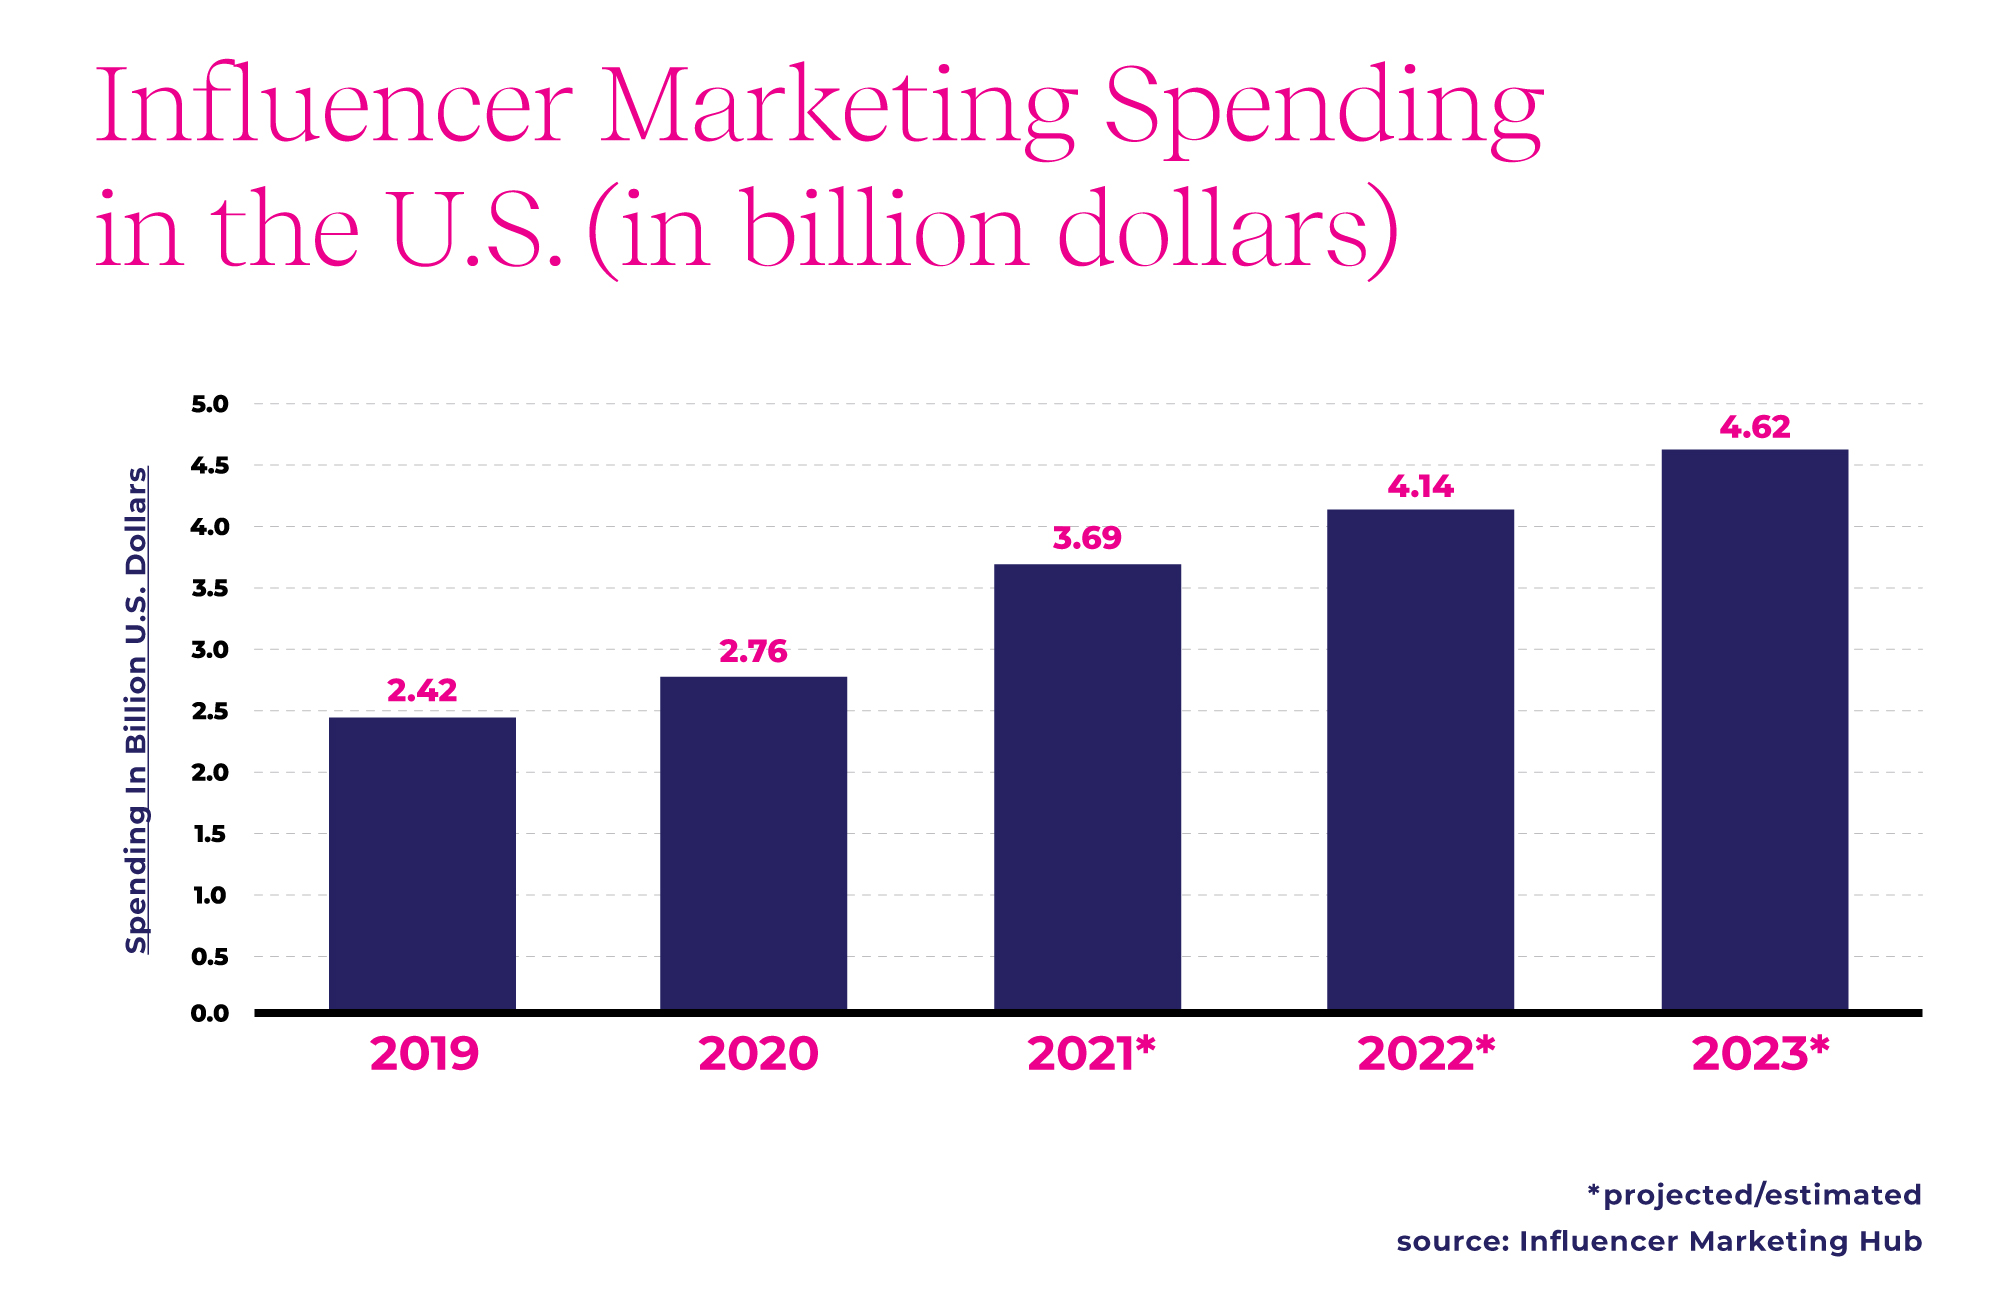 Influencer Marketing Spending in the U.S. (in Billions) - This chart shows growth year over year, from $2.42B in 2019 to $4.62B projected in 2023